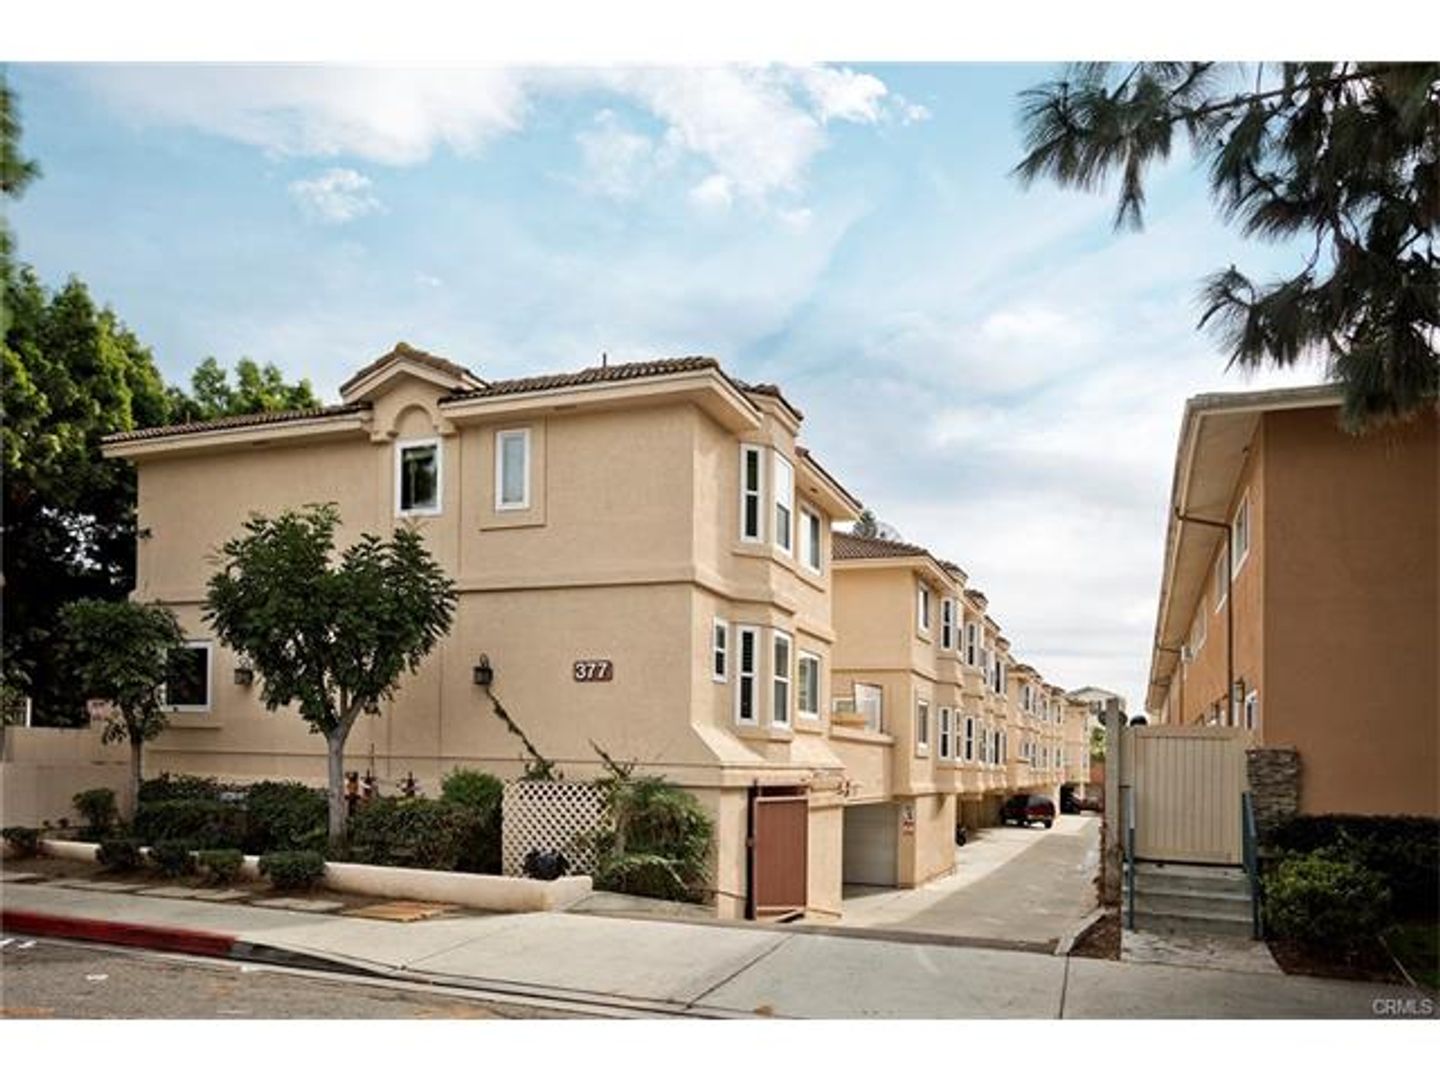 Centrally Located 3 Bedroom Costa Mesa Townhome with 2 Car Garage. Near Fairview and 22nd Street - Easy Access to 55.